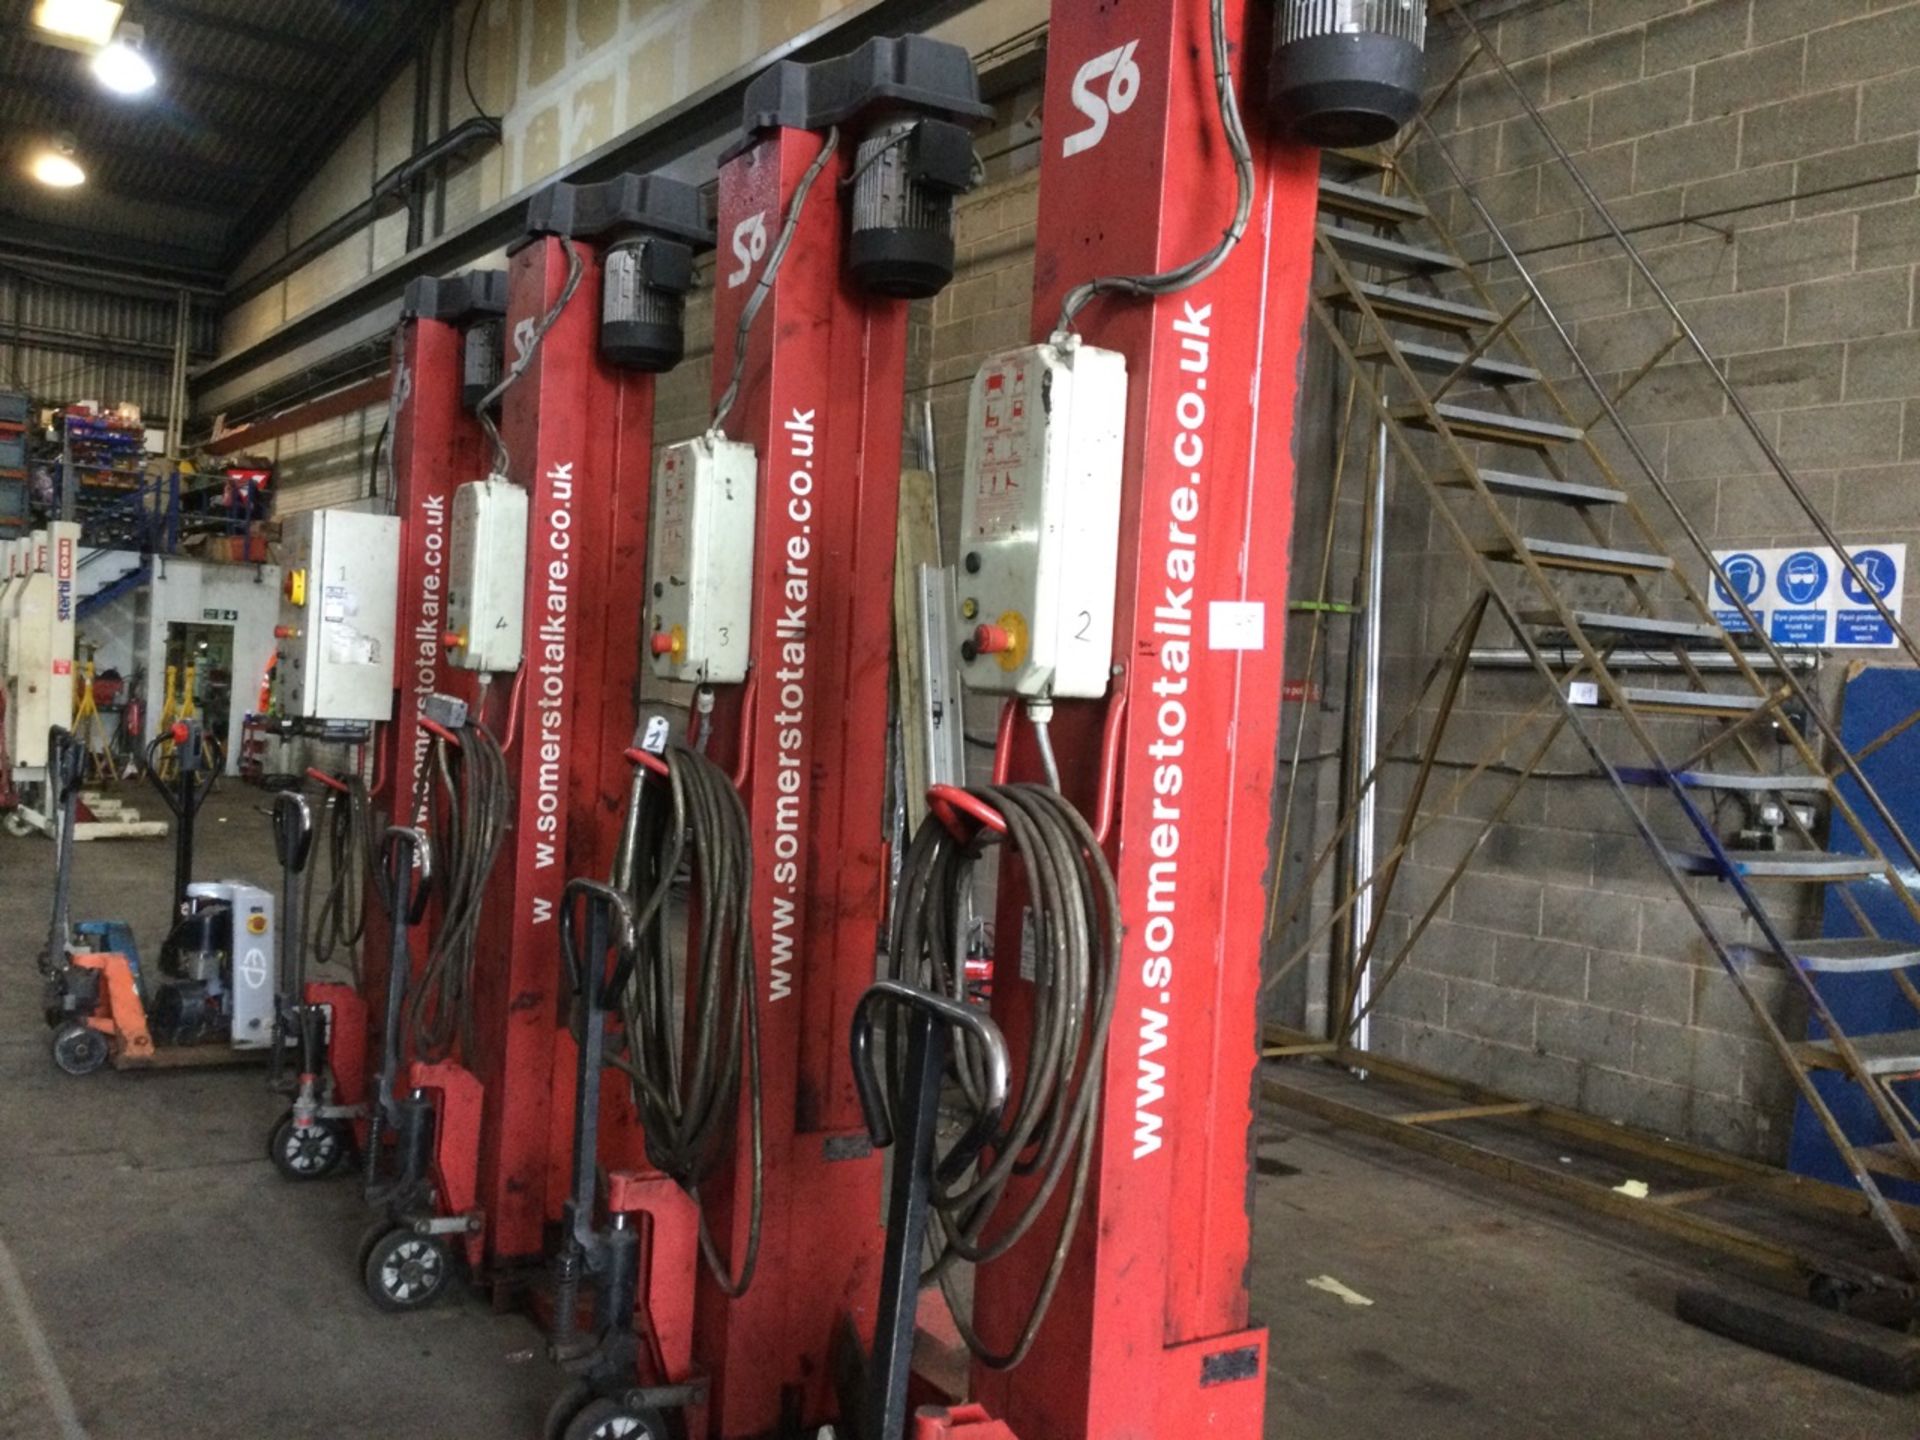 Somers/Ravaglioli RAV232 SM Mobile Cable Connected Vehicle Stands, Each 5500kg Capacity, serial numb